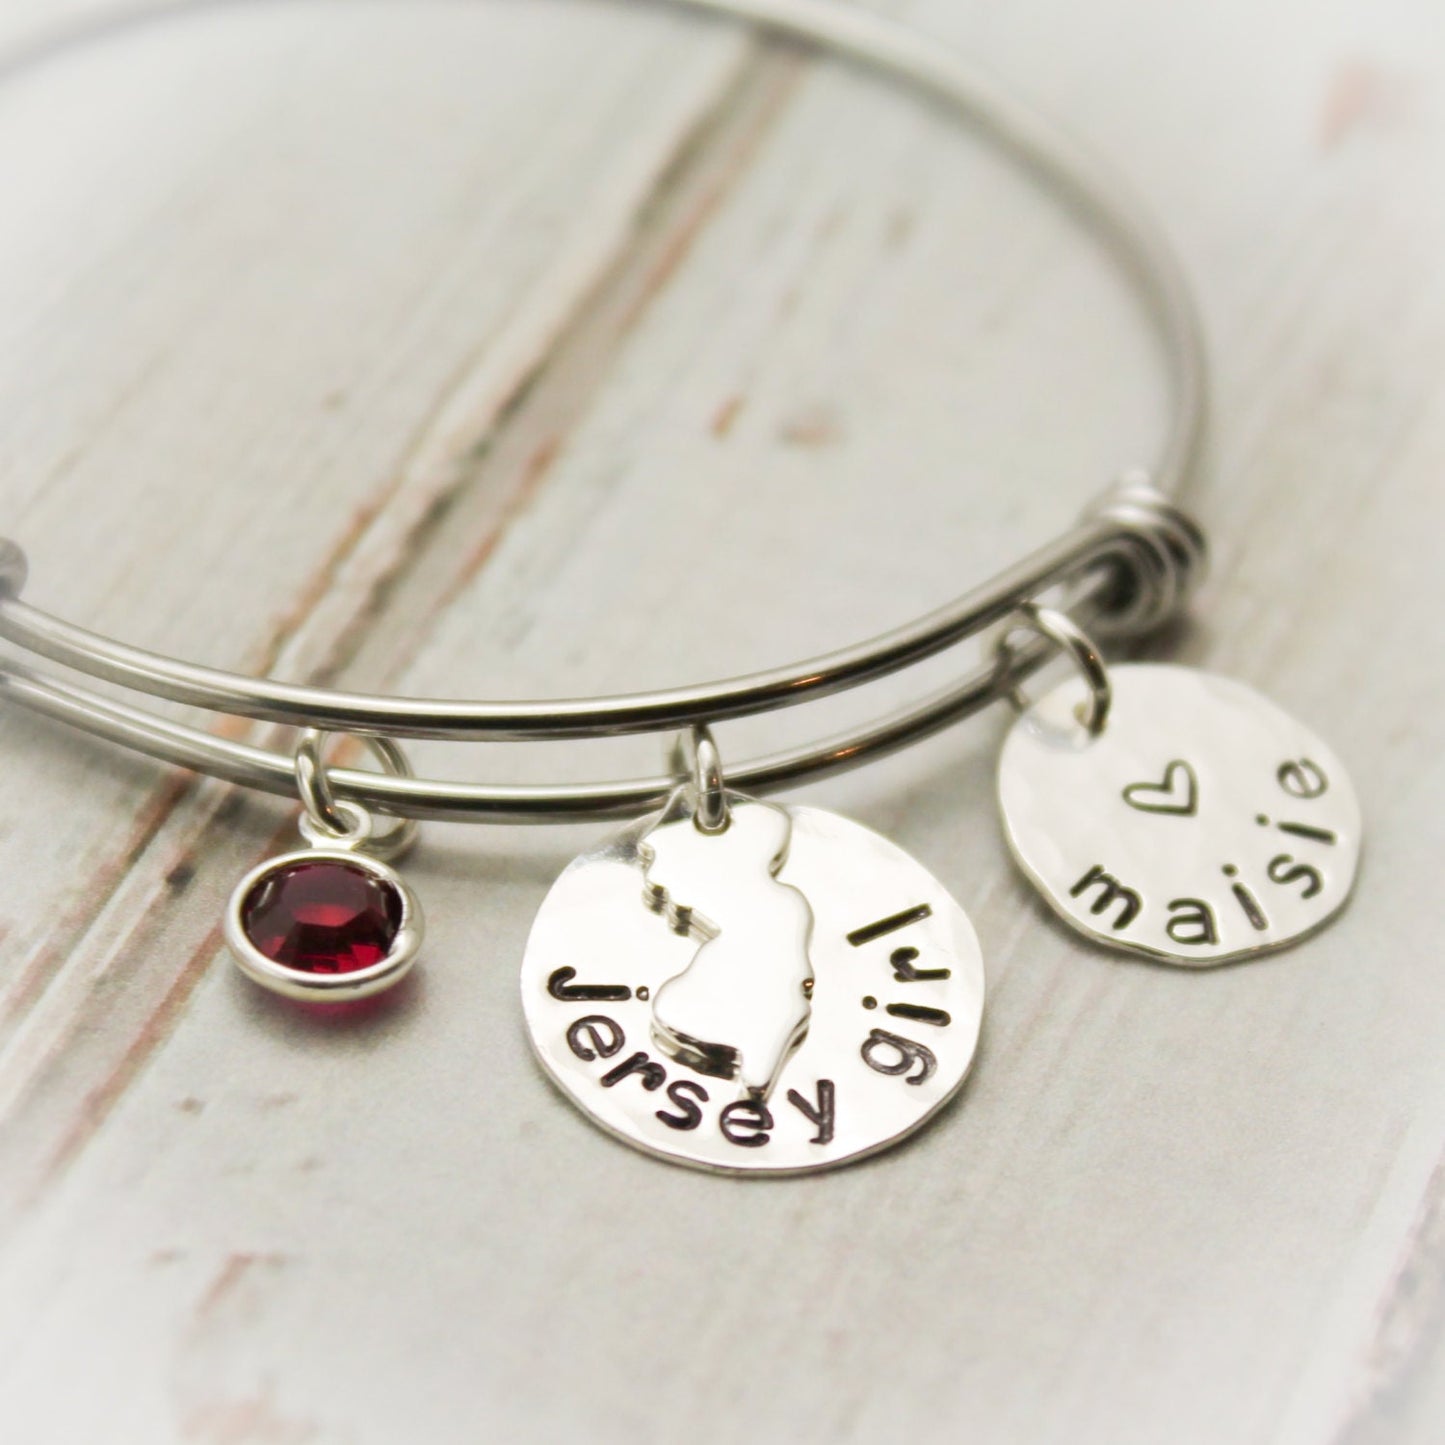 Jersey Girl Bangle Personalized Hand Stamped Jewelry